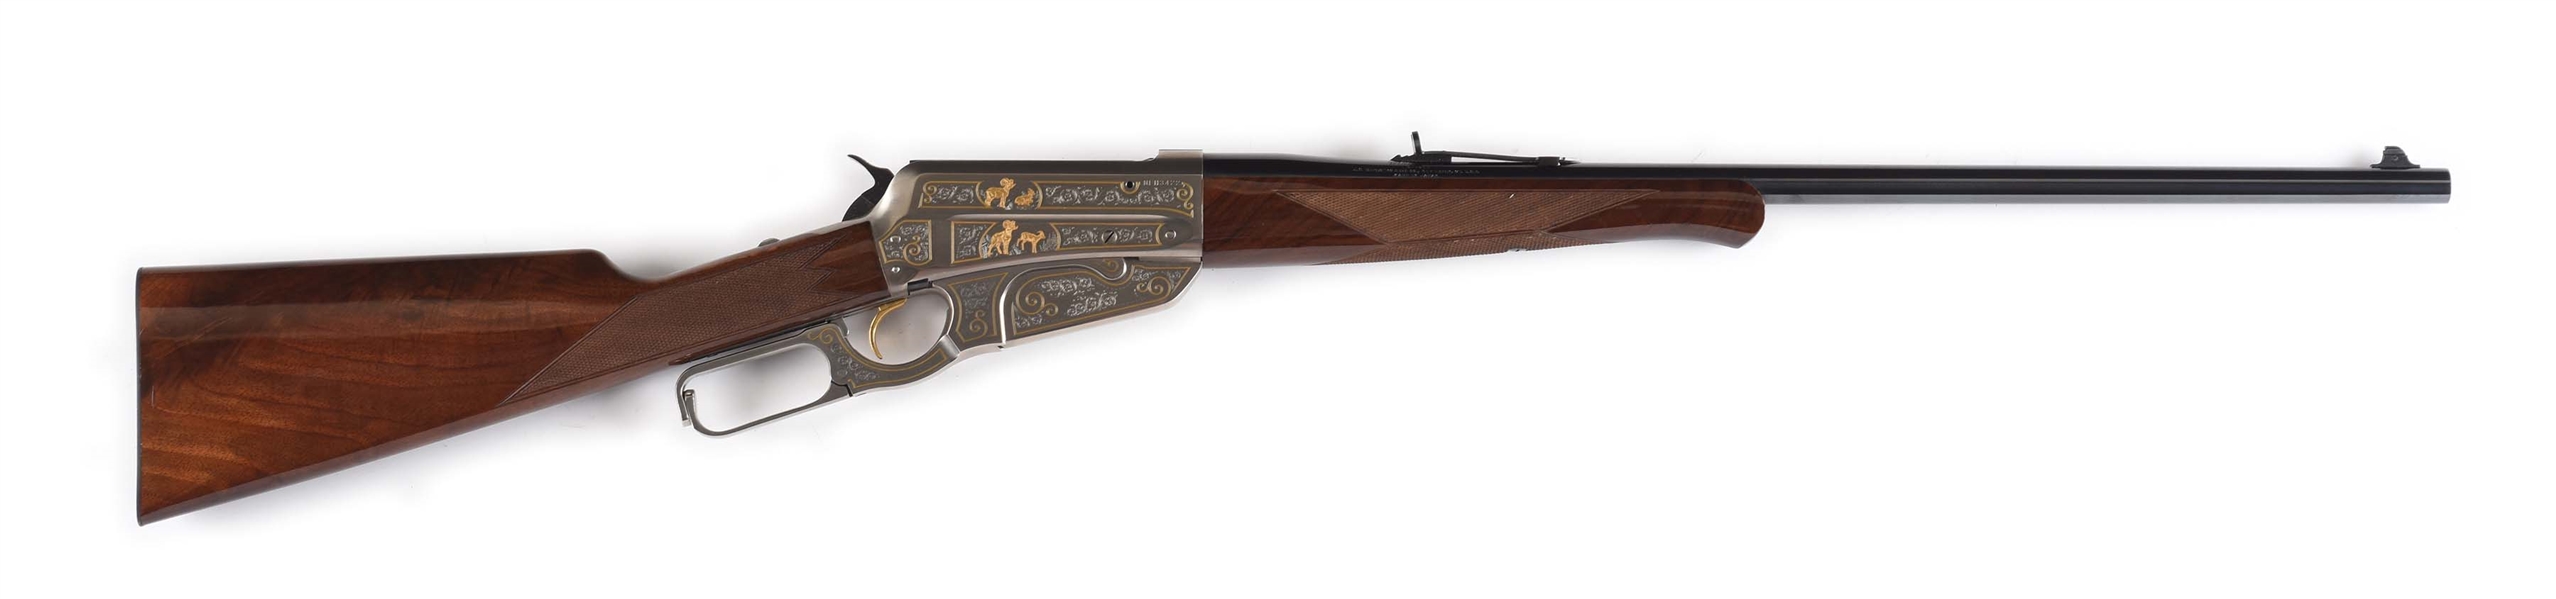 (M) BOXED AND ENGRAVED WINCHESTER MODEL 1895 LEVER ACTION RIFLE.